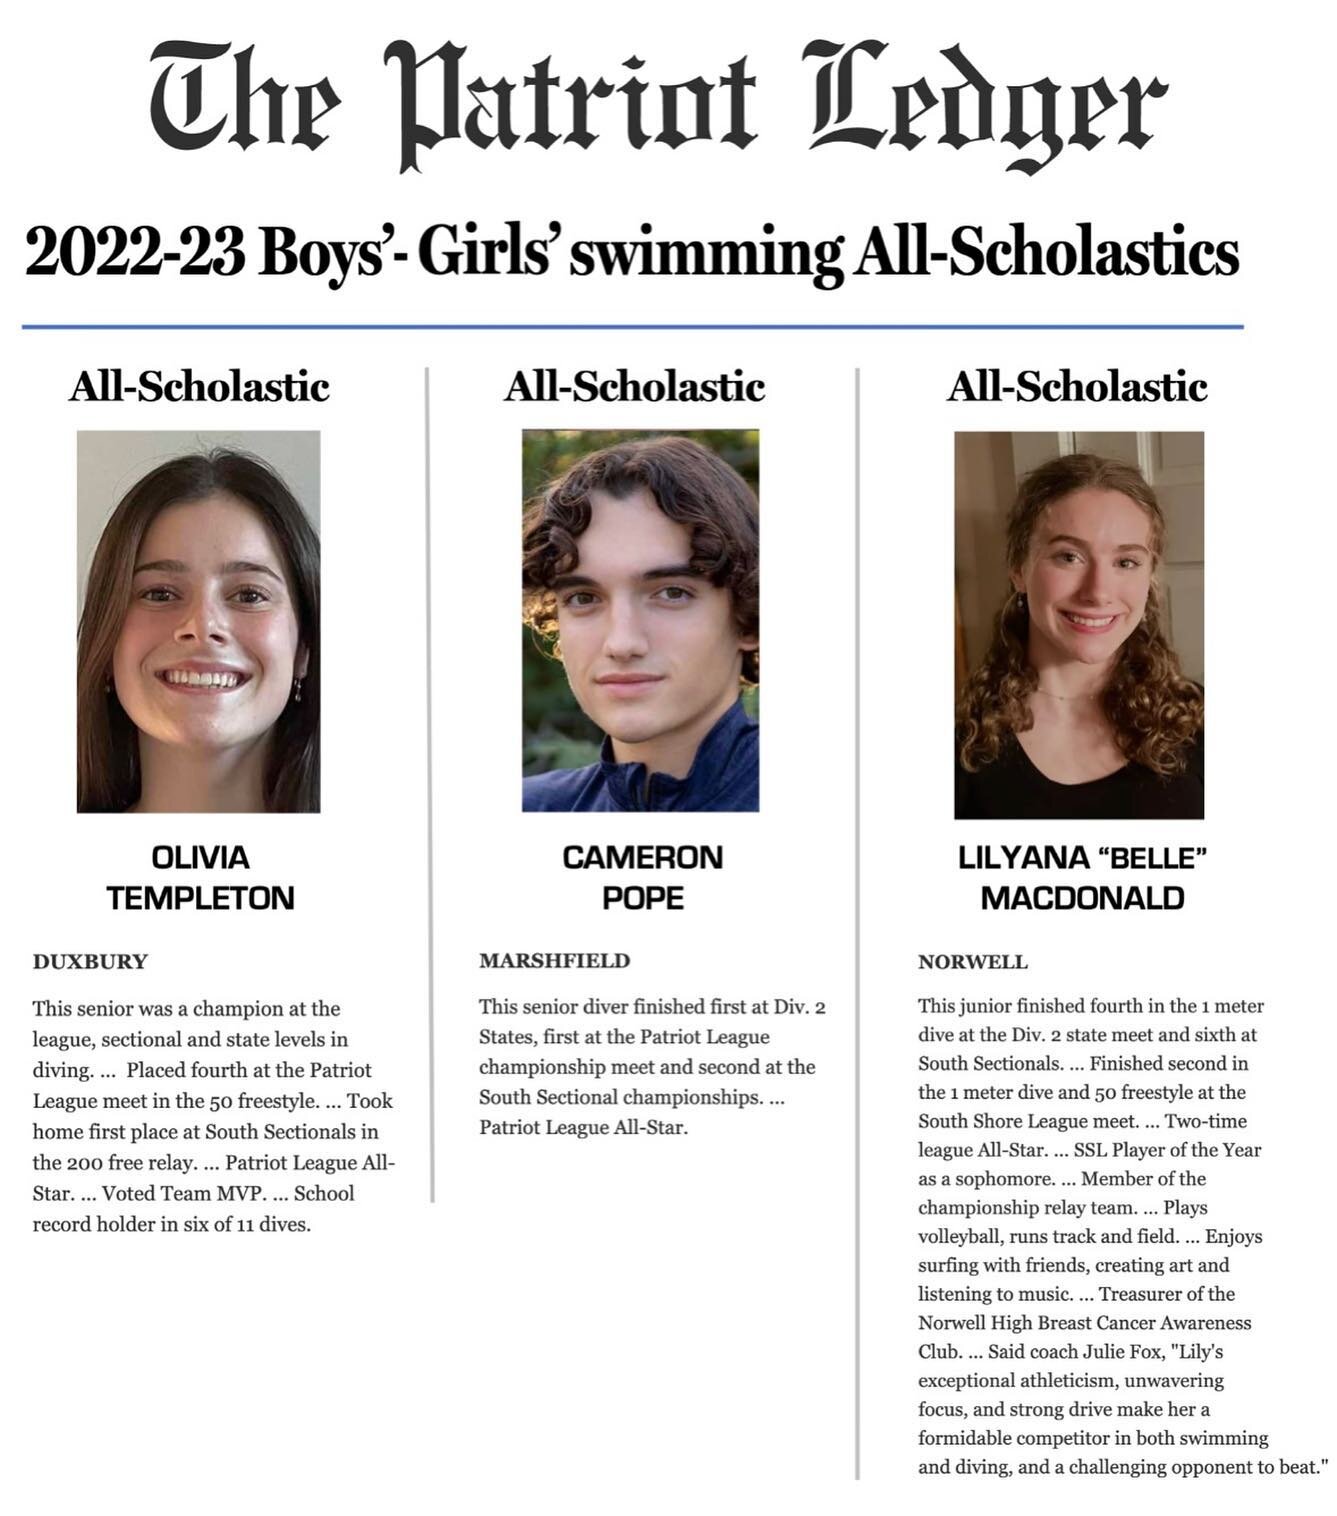 Congratulations to Olivia Templeton, Cam Pope, and Lilyana &ldquo;Belle&rdquo; MacDonald for earning this honor as a newly minted Patriot Ledger All-Scholastic! 🏆🏆👏🏼🇺🇸🇺🇸🇺🇸👏🏼👏🏼👏🏼